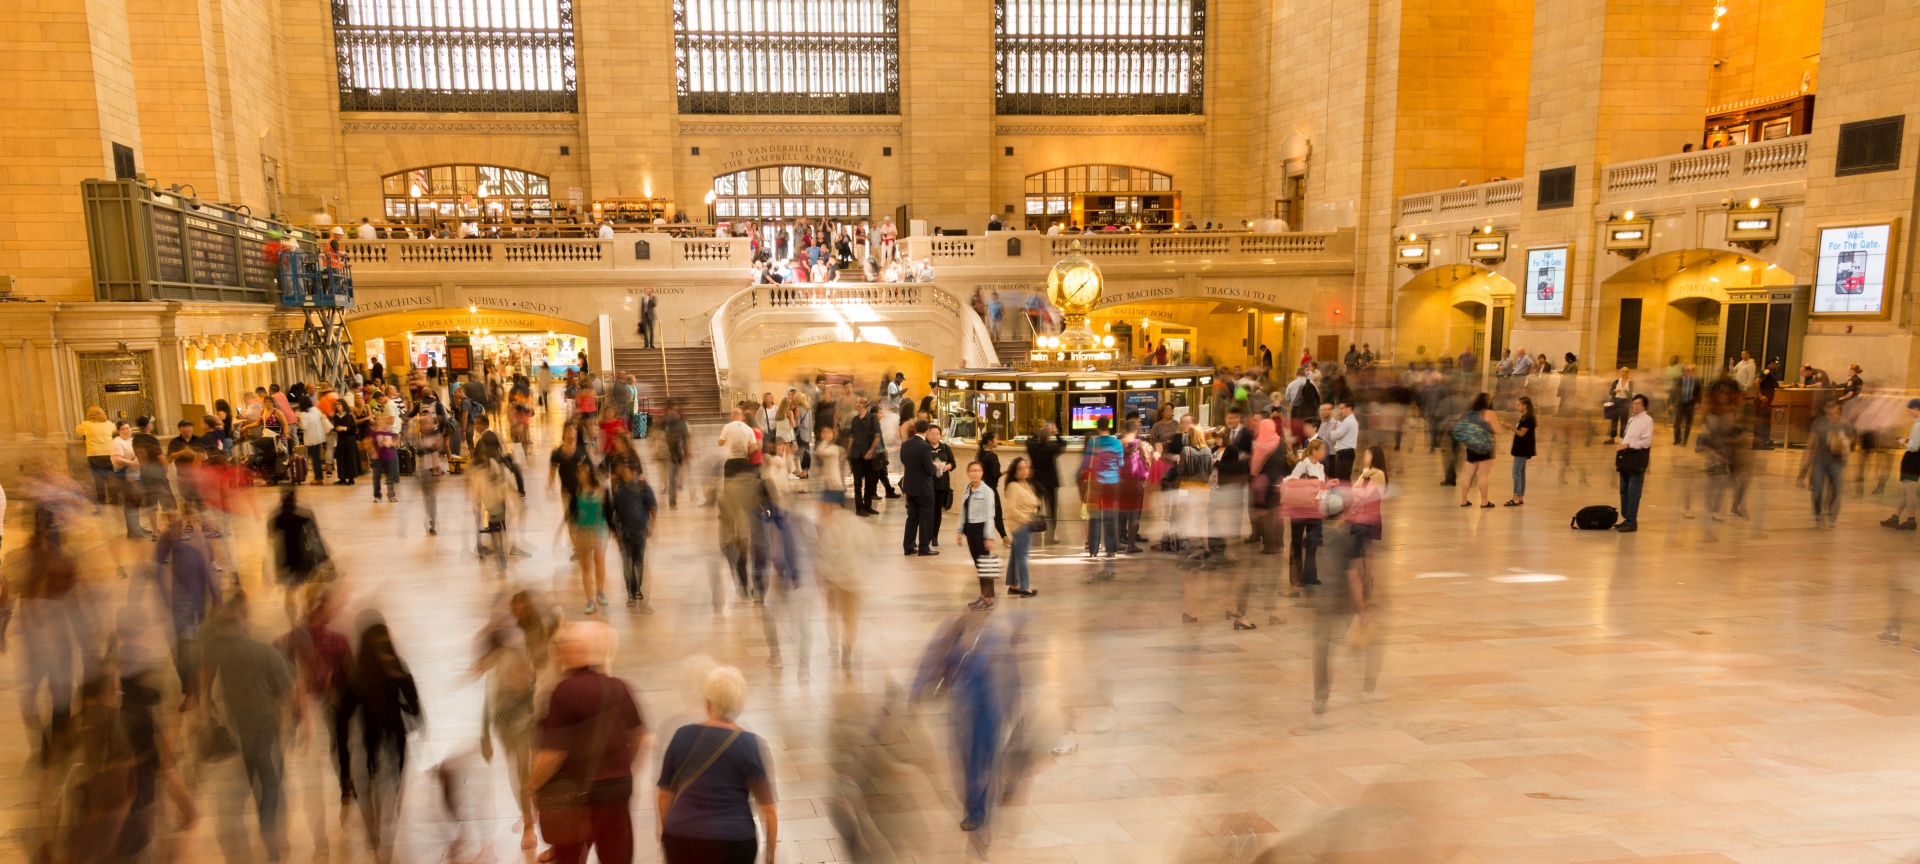 grand central terminal building busy free photo